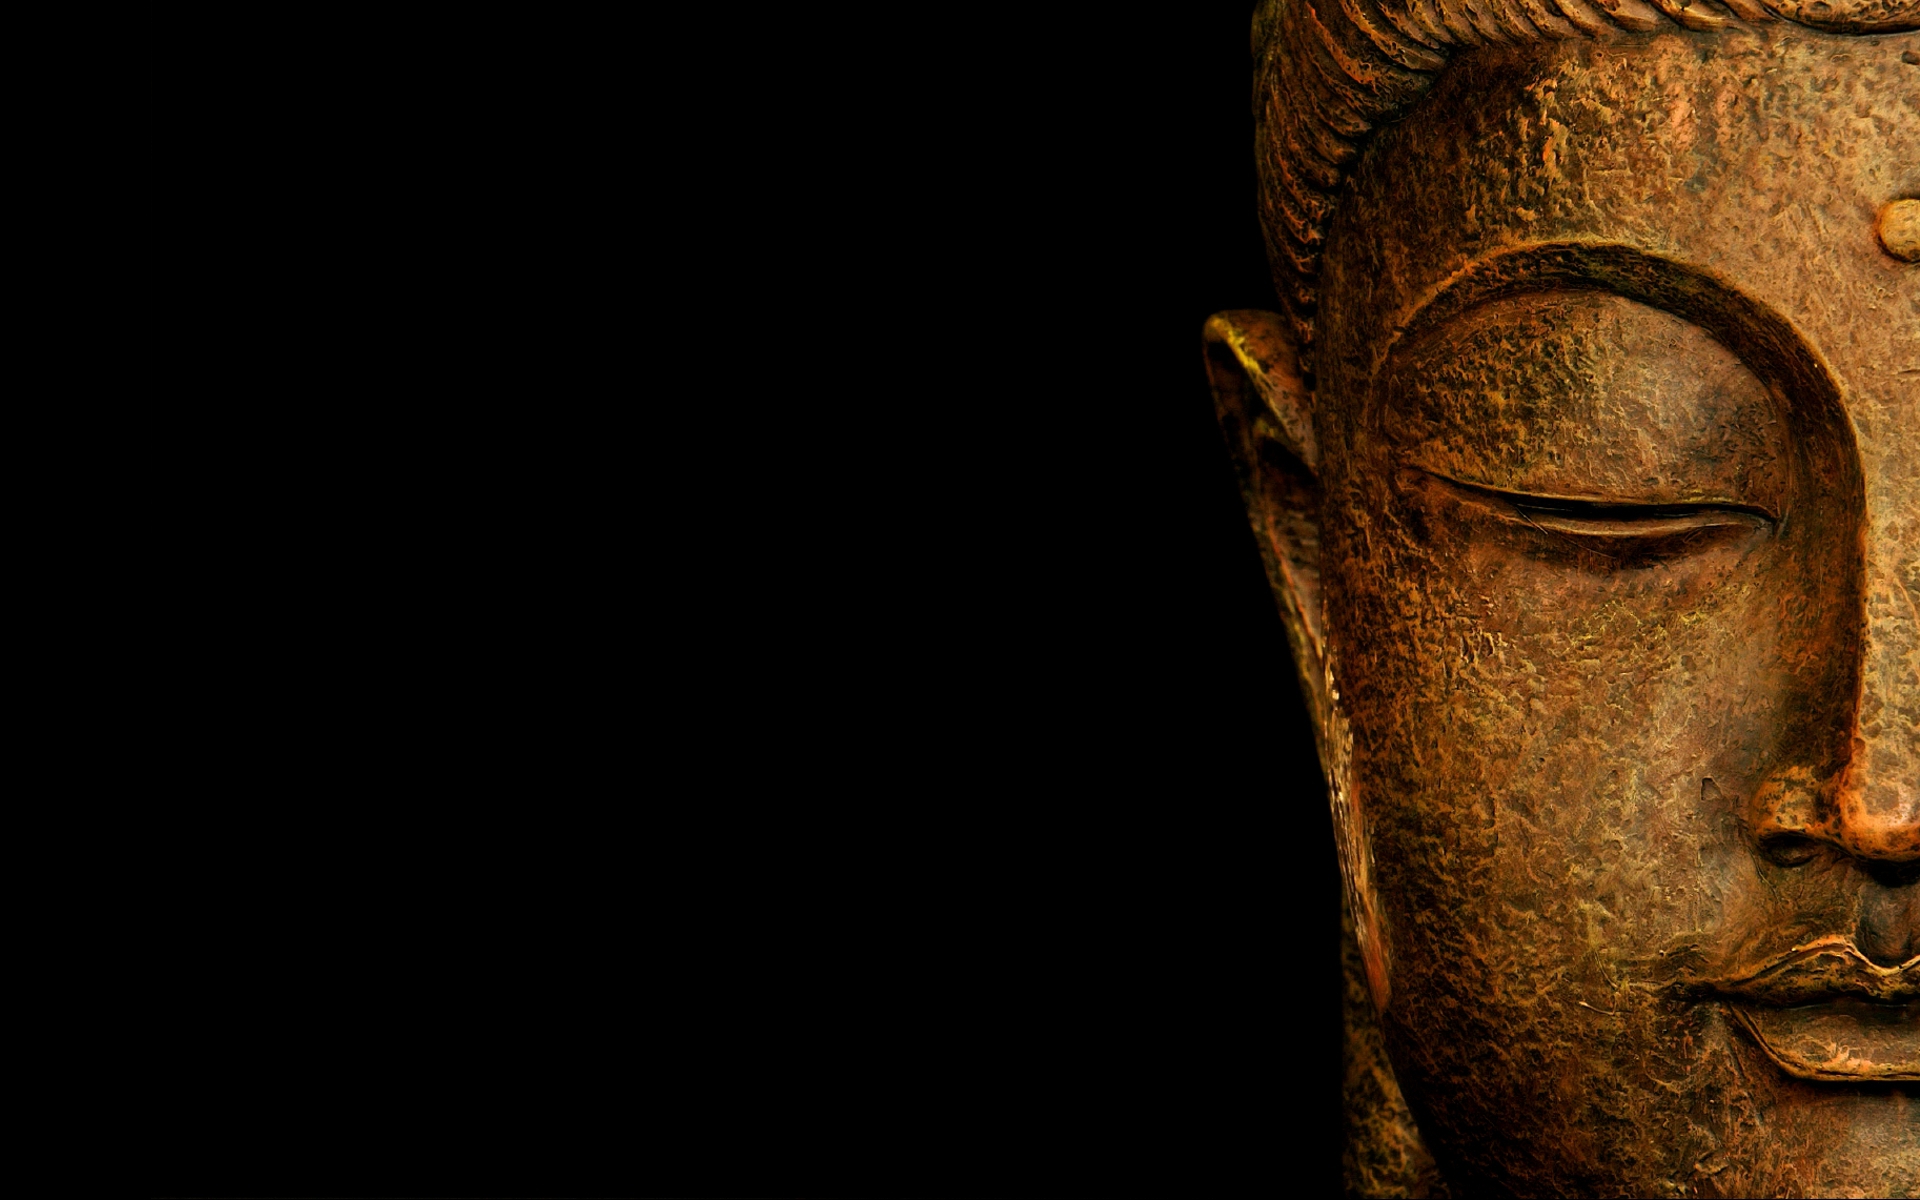 Face Of Buddha Wallpapers And Images Wallpapers HD Wallpapers Download Free Images Wallpaper [wallpaper981.blogspot.com]